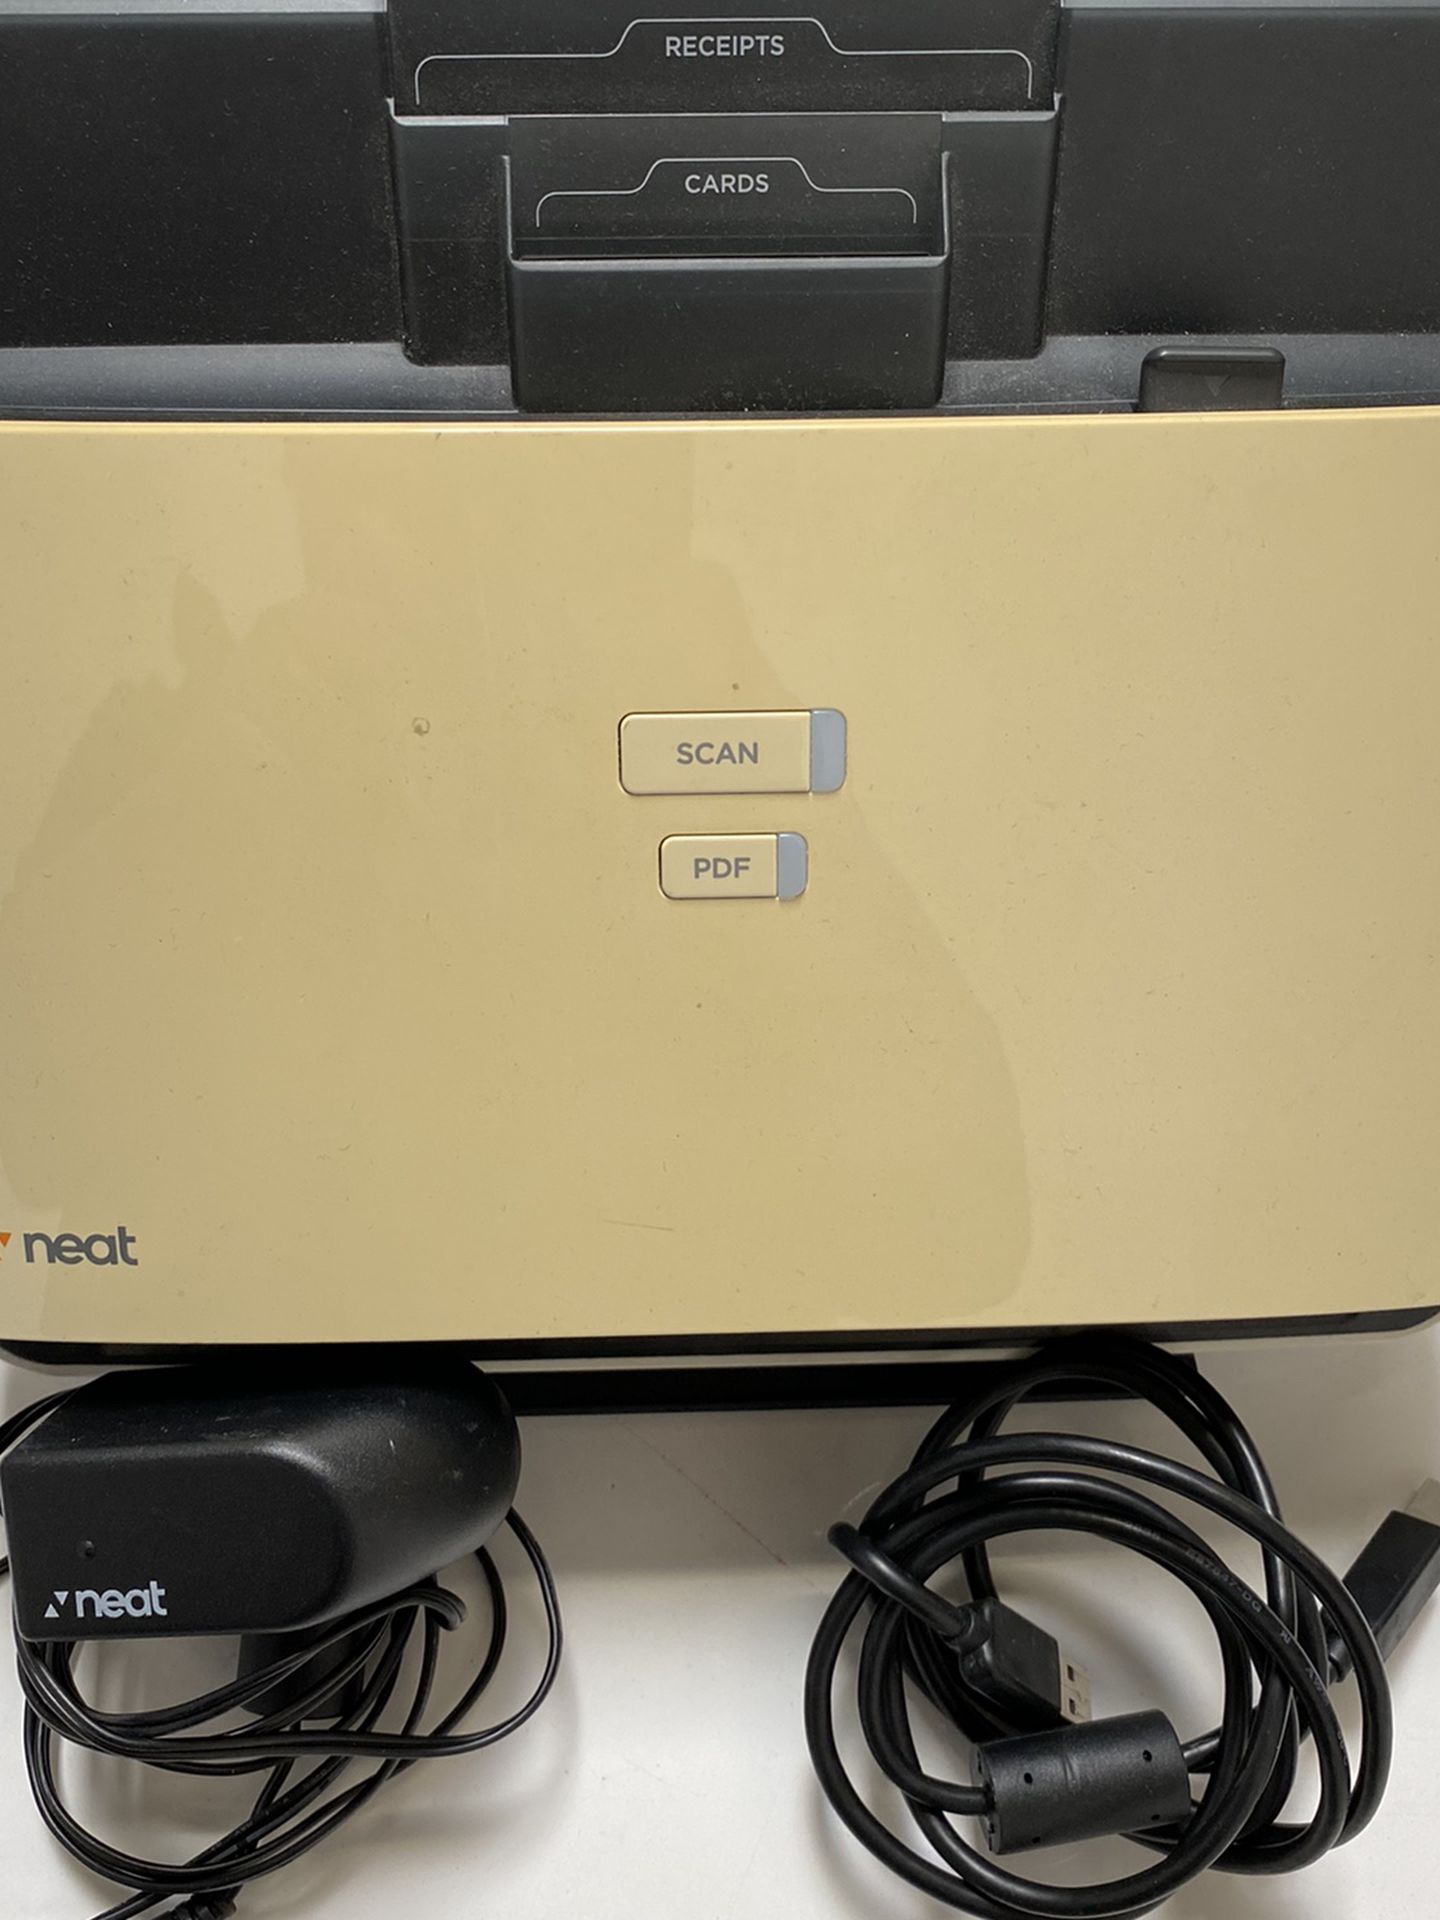 Neat ND-1000 Document scanner With USB Cable And power Adapter